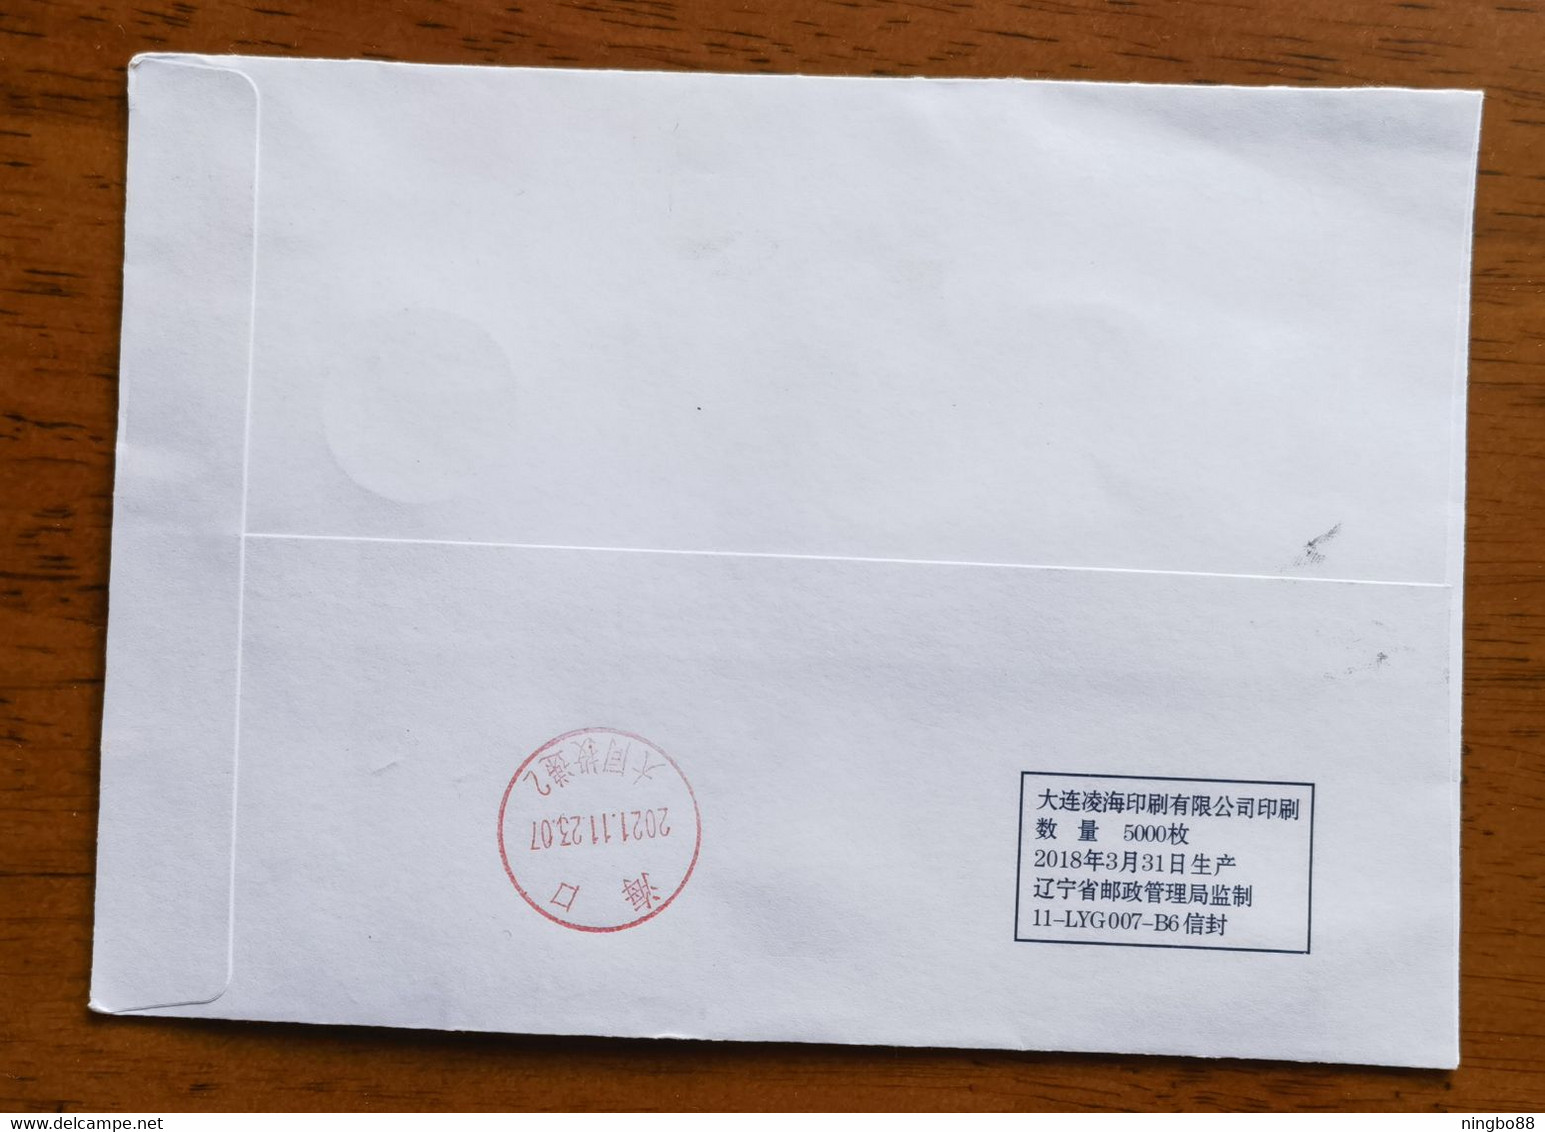 Mail Undeliverable And Returned Because Of COVID-19 In Ruili,CN 21 Ruili Post Fighting COVID-19 Propaganda Label Used - Disease